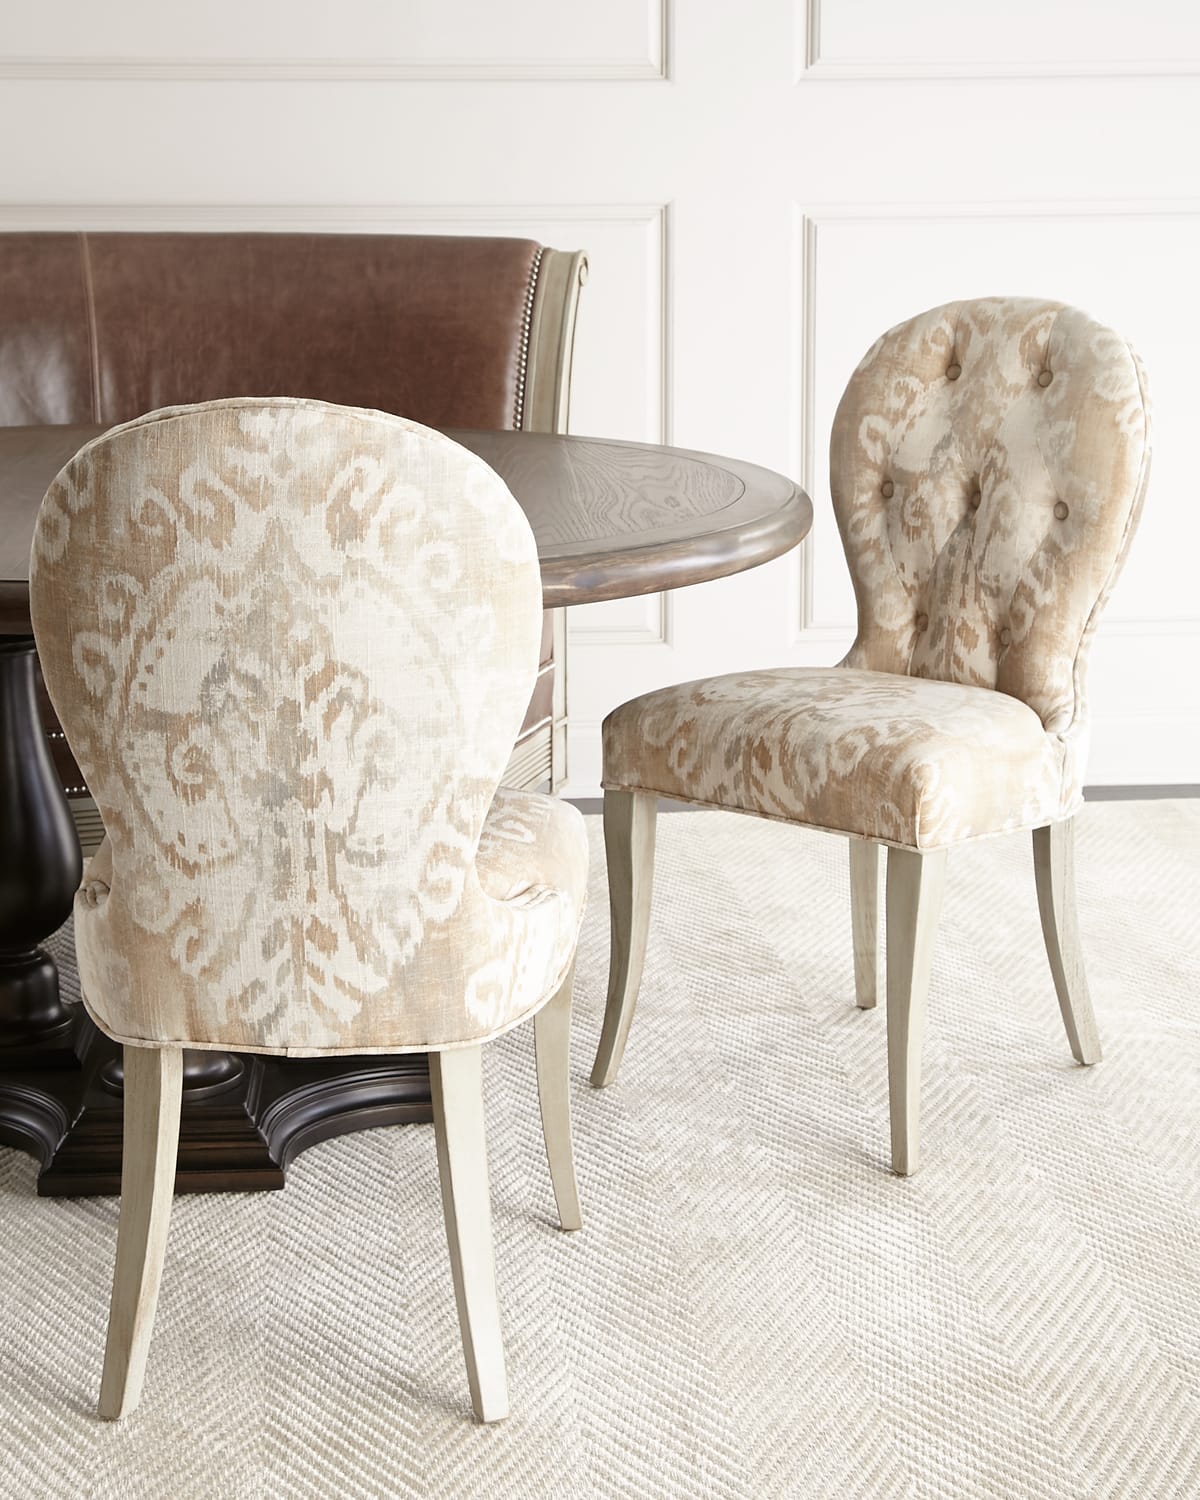 Massoud Porcelain Dining Chair In Neutral